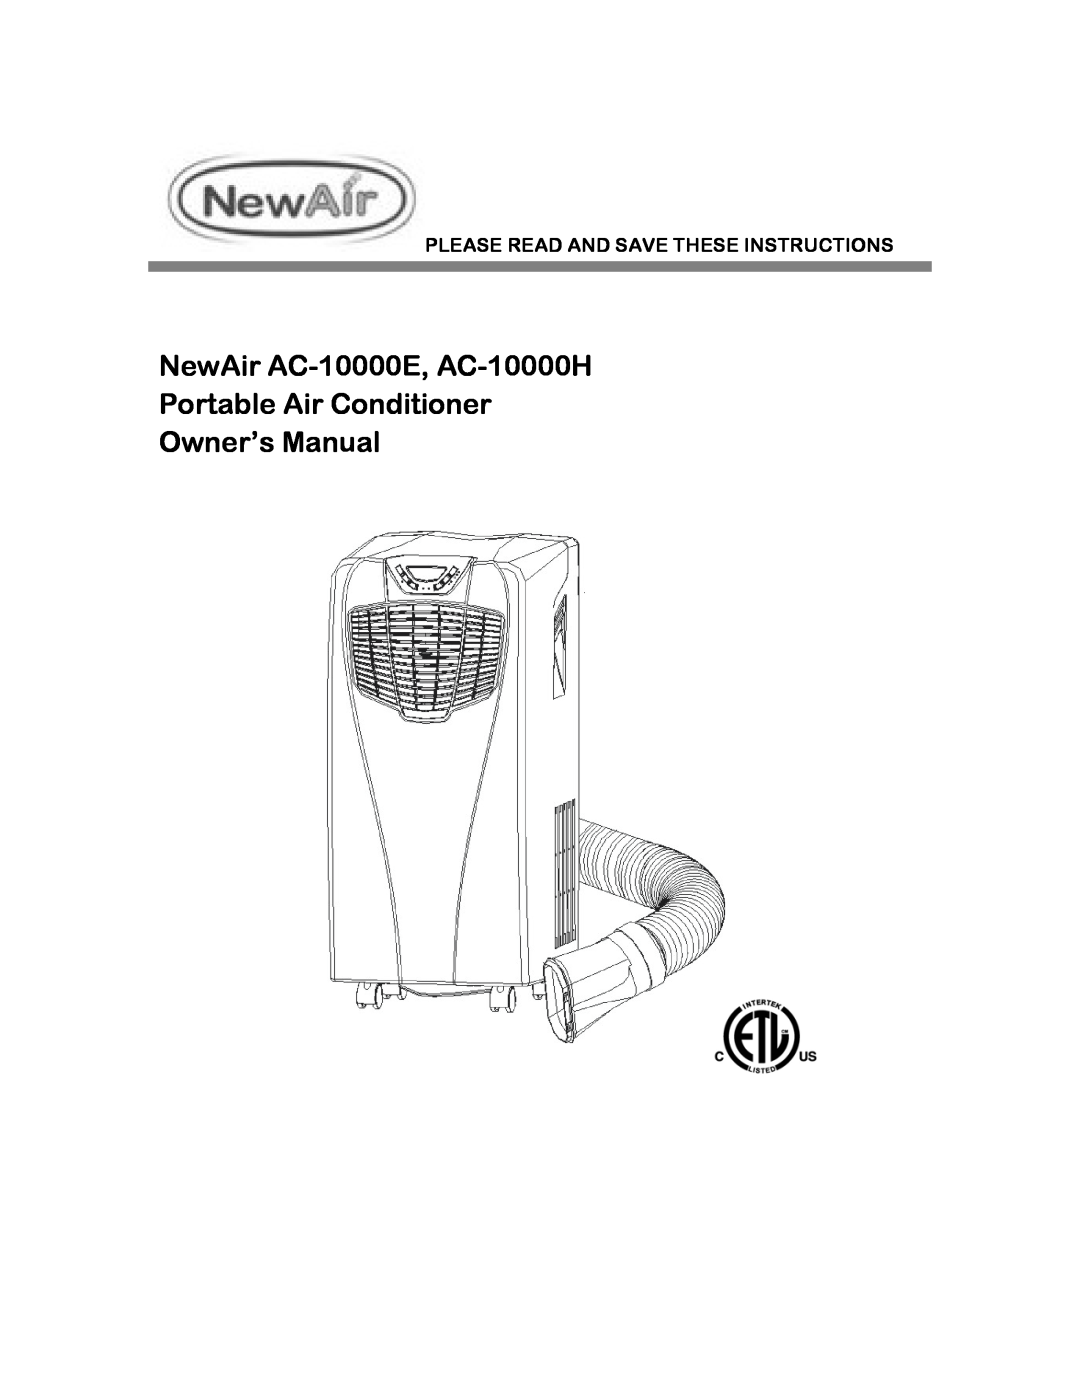 NewAir owner manual NewAir AC-10000E, AC-10000H, Please Read And Save These Instructions 